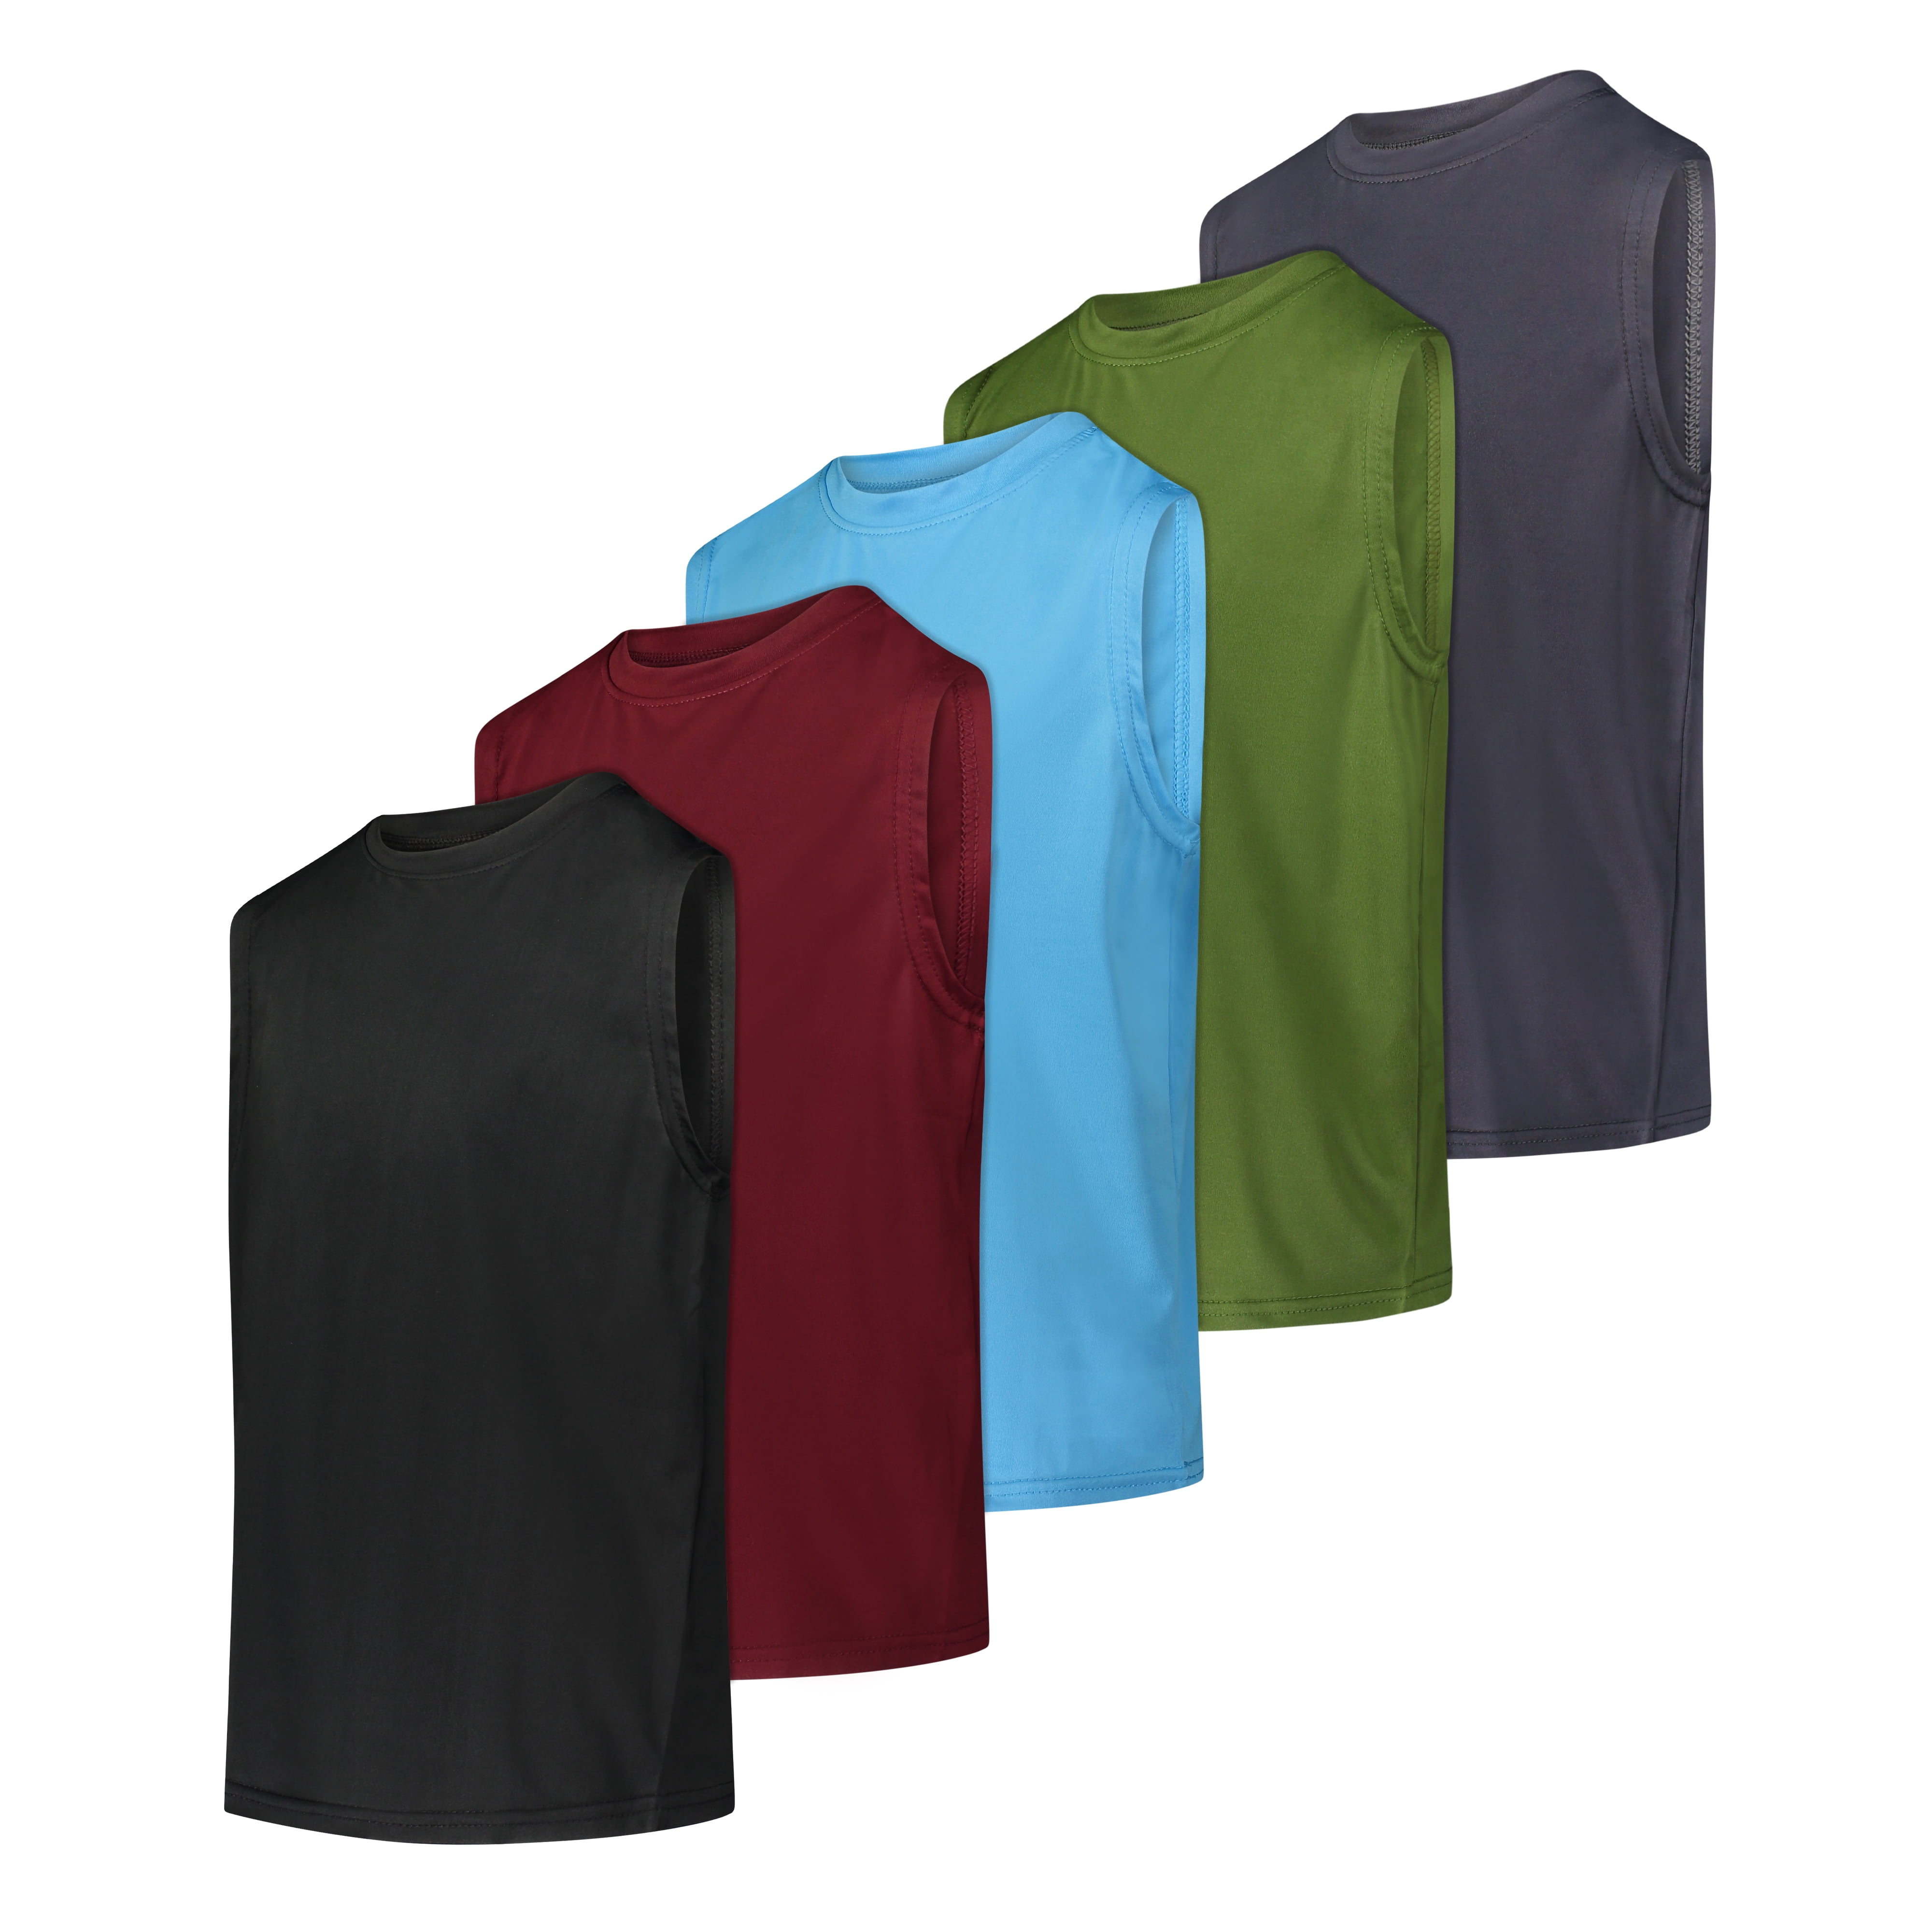 5 Pack: Boys Dry-Fit Active Athletic Performance Tank Top - Walmart.com